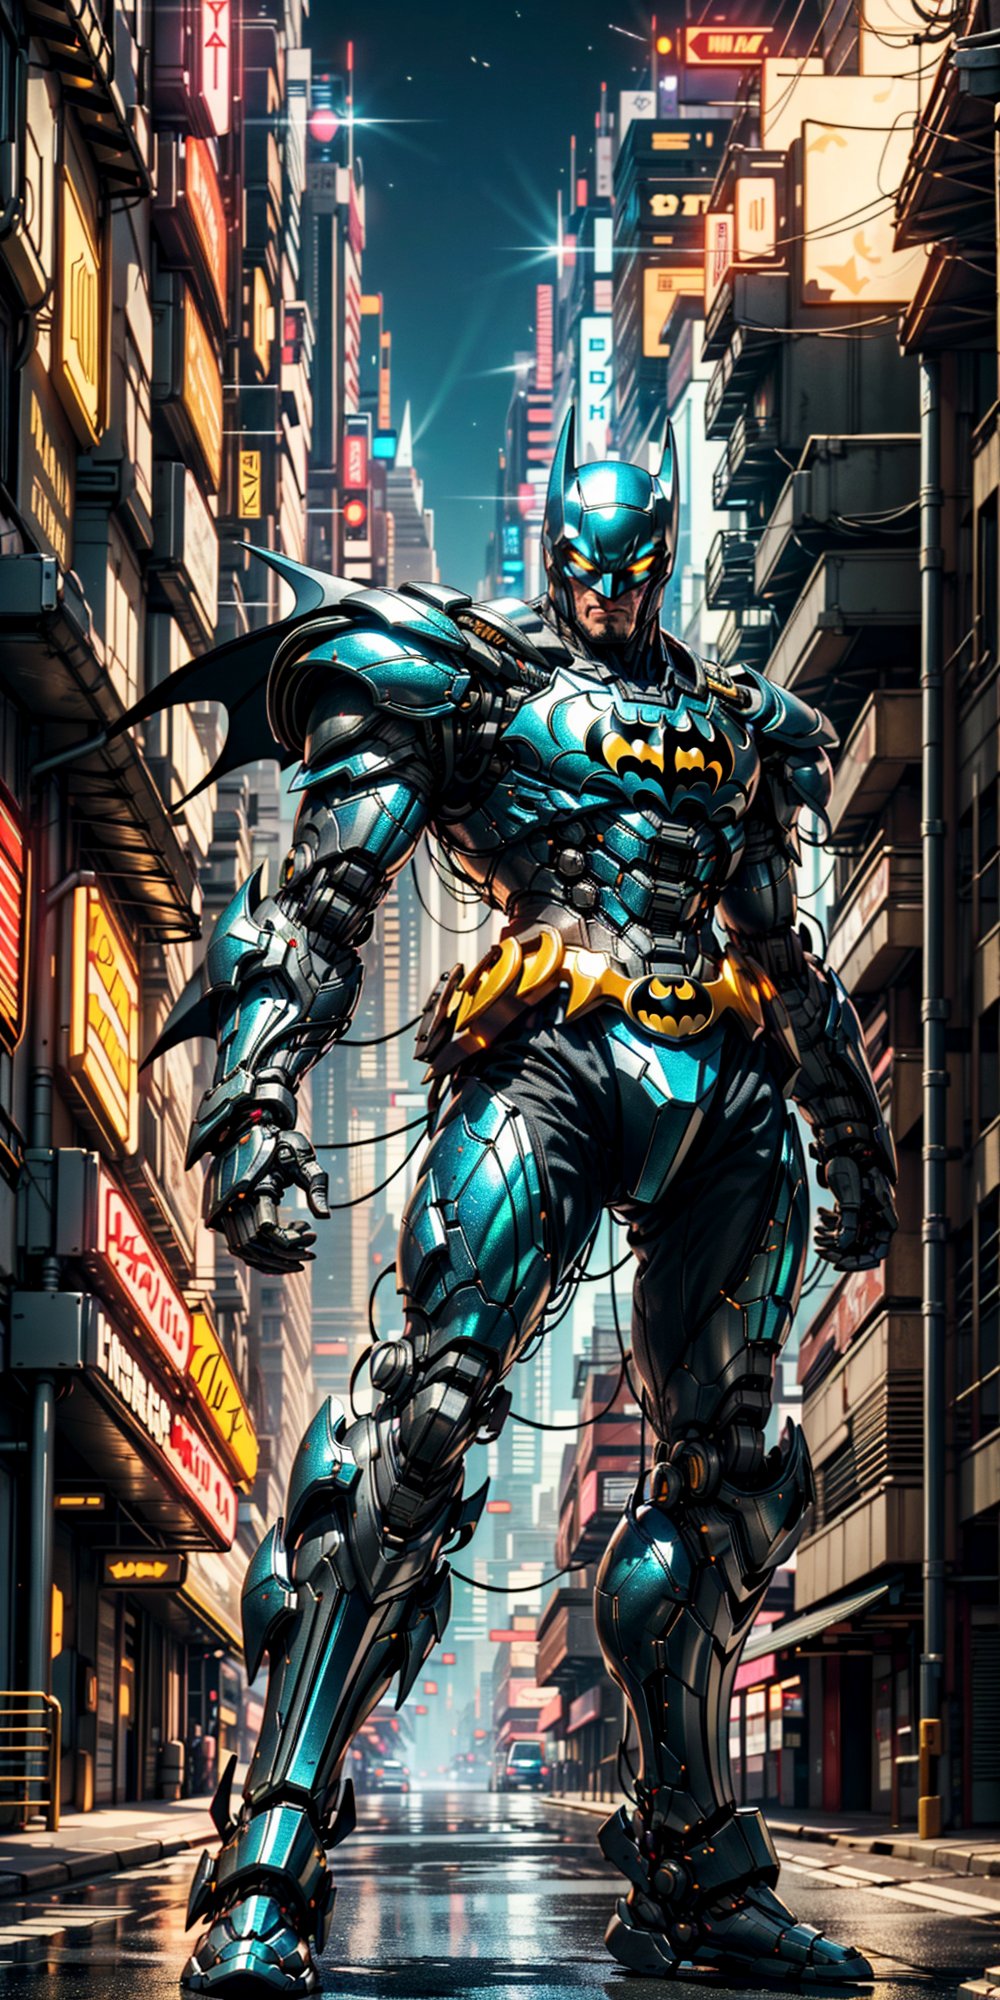 In the neon-lit streets of a cyberpunk metropolis, a Hi-Tech swordsman emerges as a beacon of futuristic prowess. Encased in a robotic suit of red and blue armor, he stands within a pulsating cocoon of yellow luminescence. The armor's intricate details reflect the advanced technology that defines this world.

At his side, a custom cyber-style sword gleams with an otherworldly radiance, its blade a fusion of artistry and advanced engineering. The streets behind him are awash in the vibrant glow of neon signs and holographic advertisements, painting a vivid backdrop to his enigmatic presence.

The image captures every gleam and glint in astonishing 4K Ultra HDR quality, enhancing the fine details of the cybernetic armor and the interplay of light and shadow in the urban setting. This scene encapsulates the essence of cyberpunk's high-tech aesthetics, delivering an image that seamlessly marries advanced technology with cutting-edge style.,mecha musume,robot, (blurry background), (high detailed image HDR quality), (32k HDR resolution quality), realistic mecha suit armour, (((batman style mecha armour))),perfecteyes, (((shining and polished armour))) 